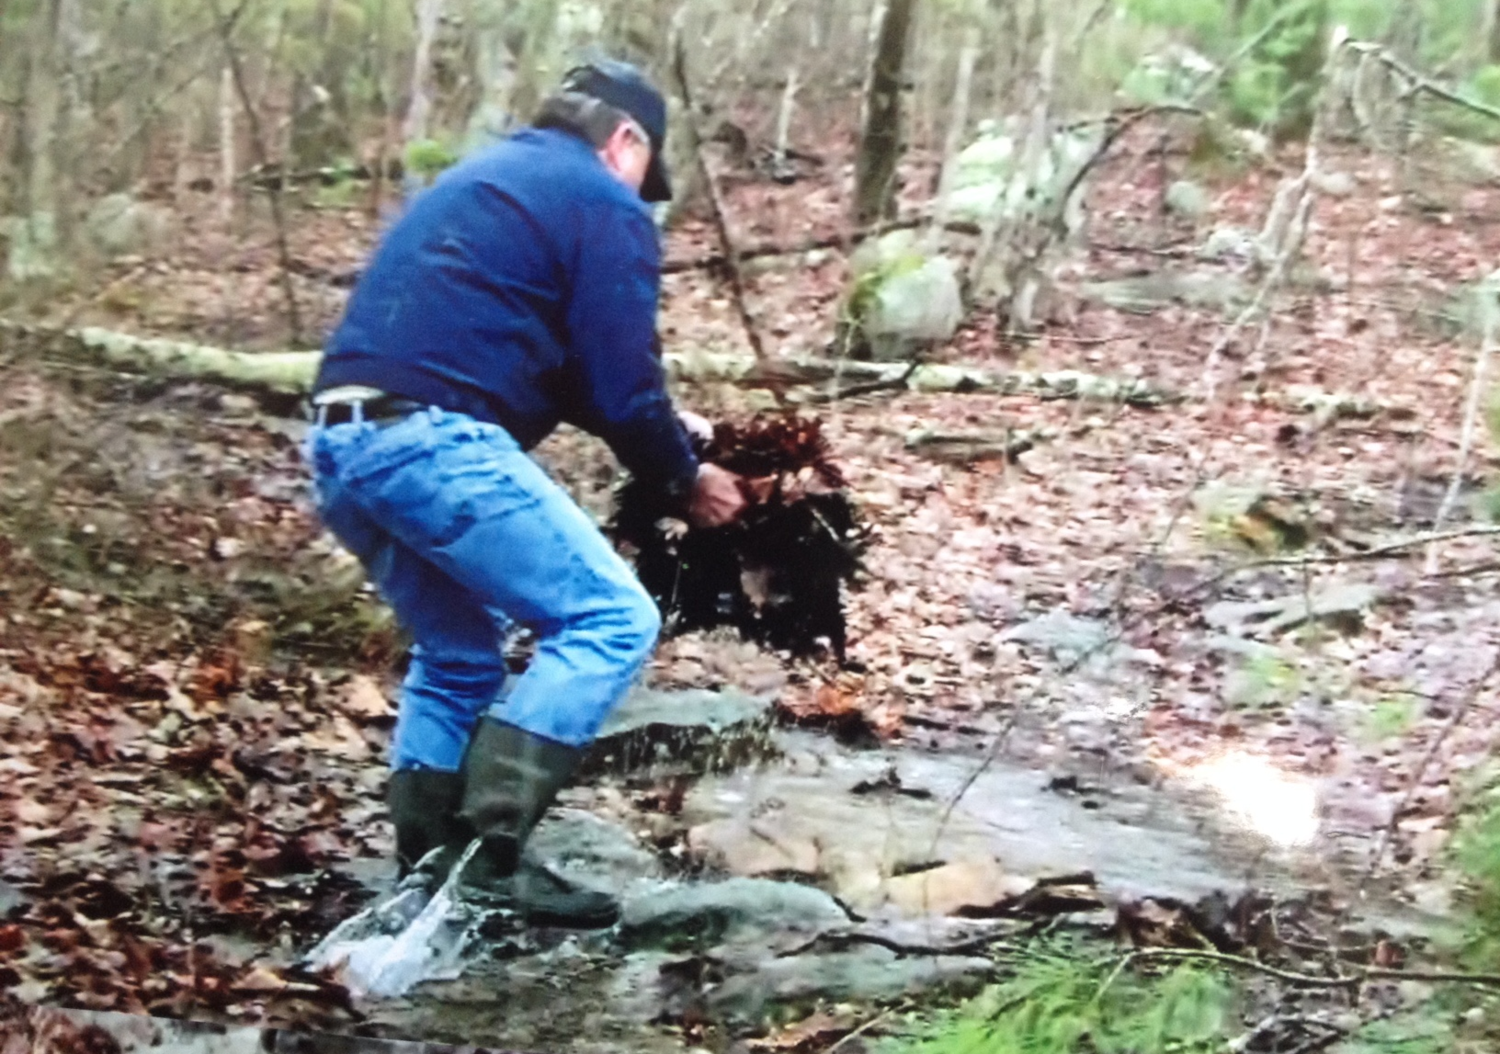  Connecticut resident Allan Rawson, managing member of Putnam-based River Junction Estates, was recently videotaped moving rocks and leaves along a watercourse in Rhode Island’s Buck Hill Management Area. (Rob Mann photos) 